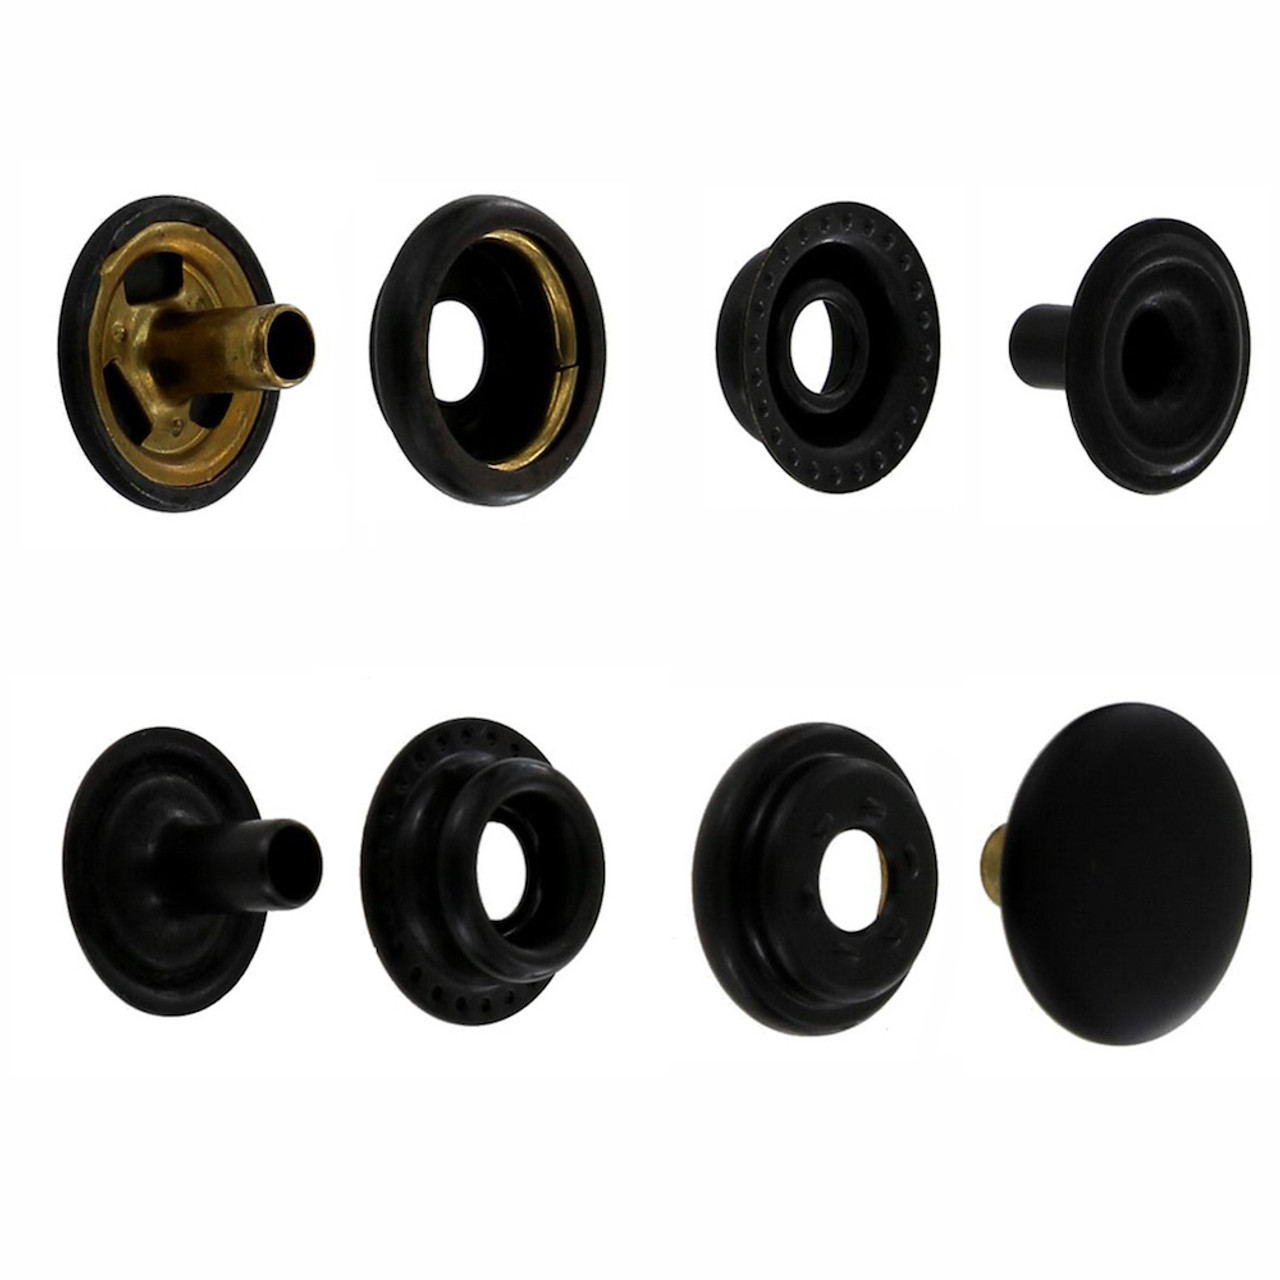 ▷ Snap Buttons - Snap Fastener 16 mm 5/8 Metal Black Coat Snap Buttons